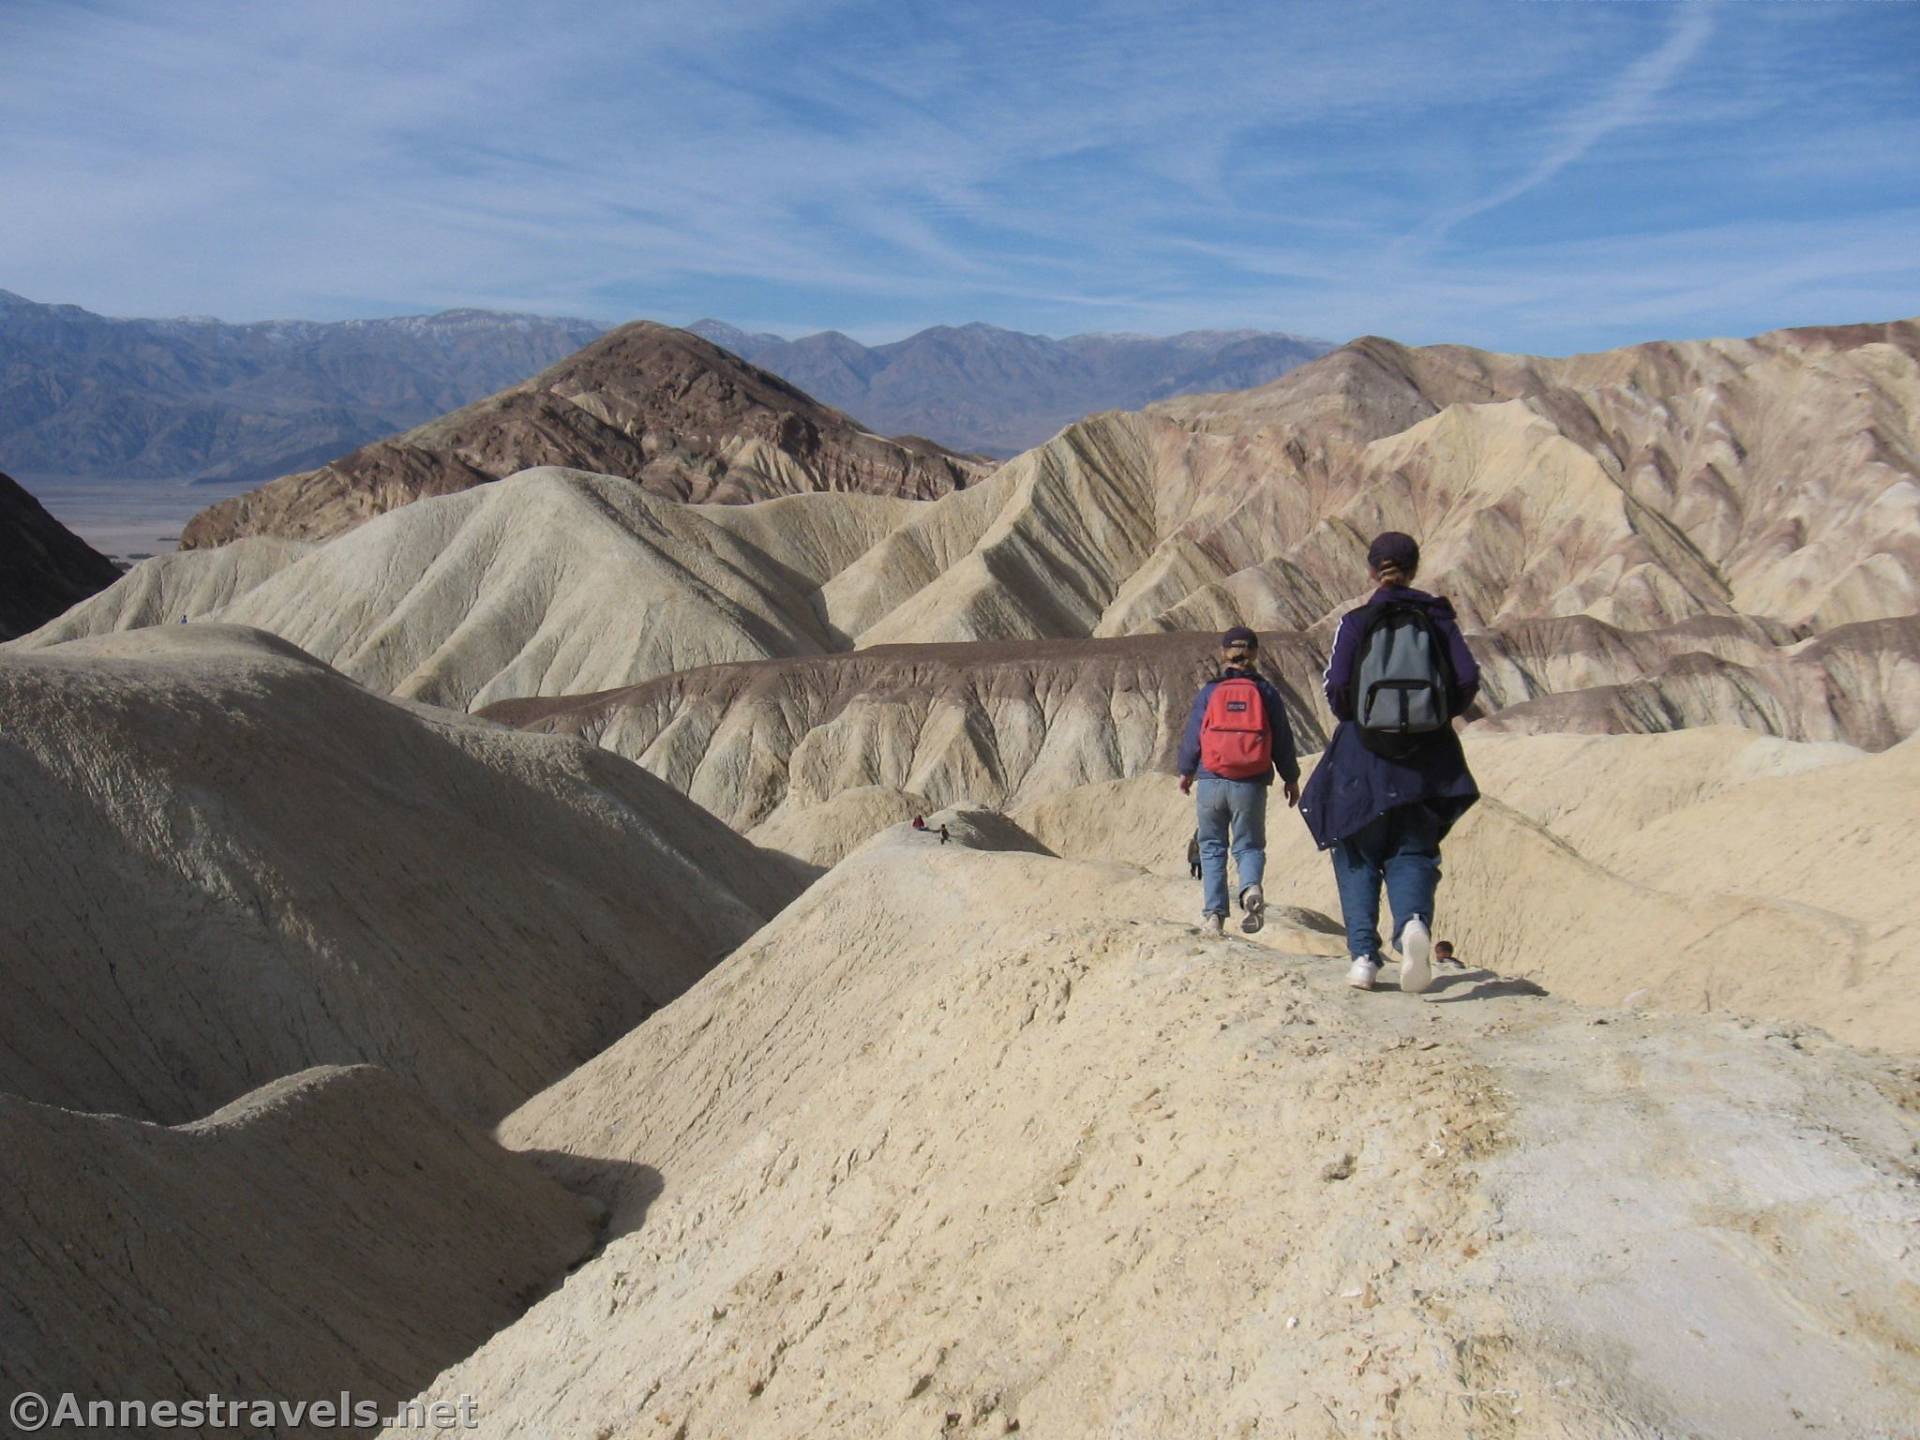 Hikers on the Badlands Trail, Death Valley National Park, California